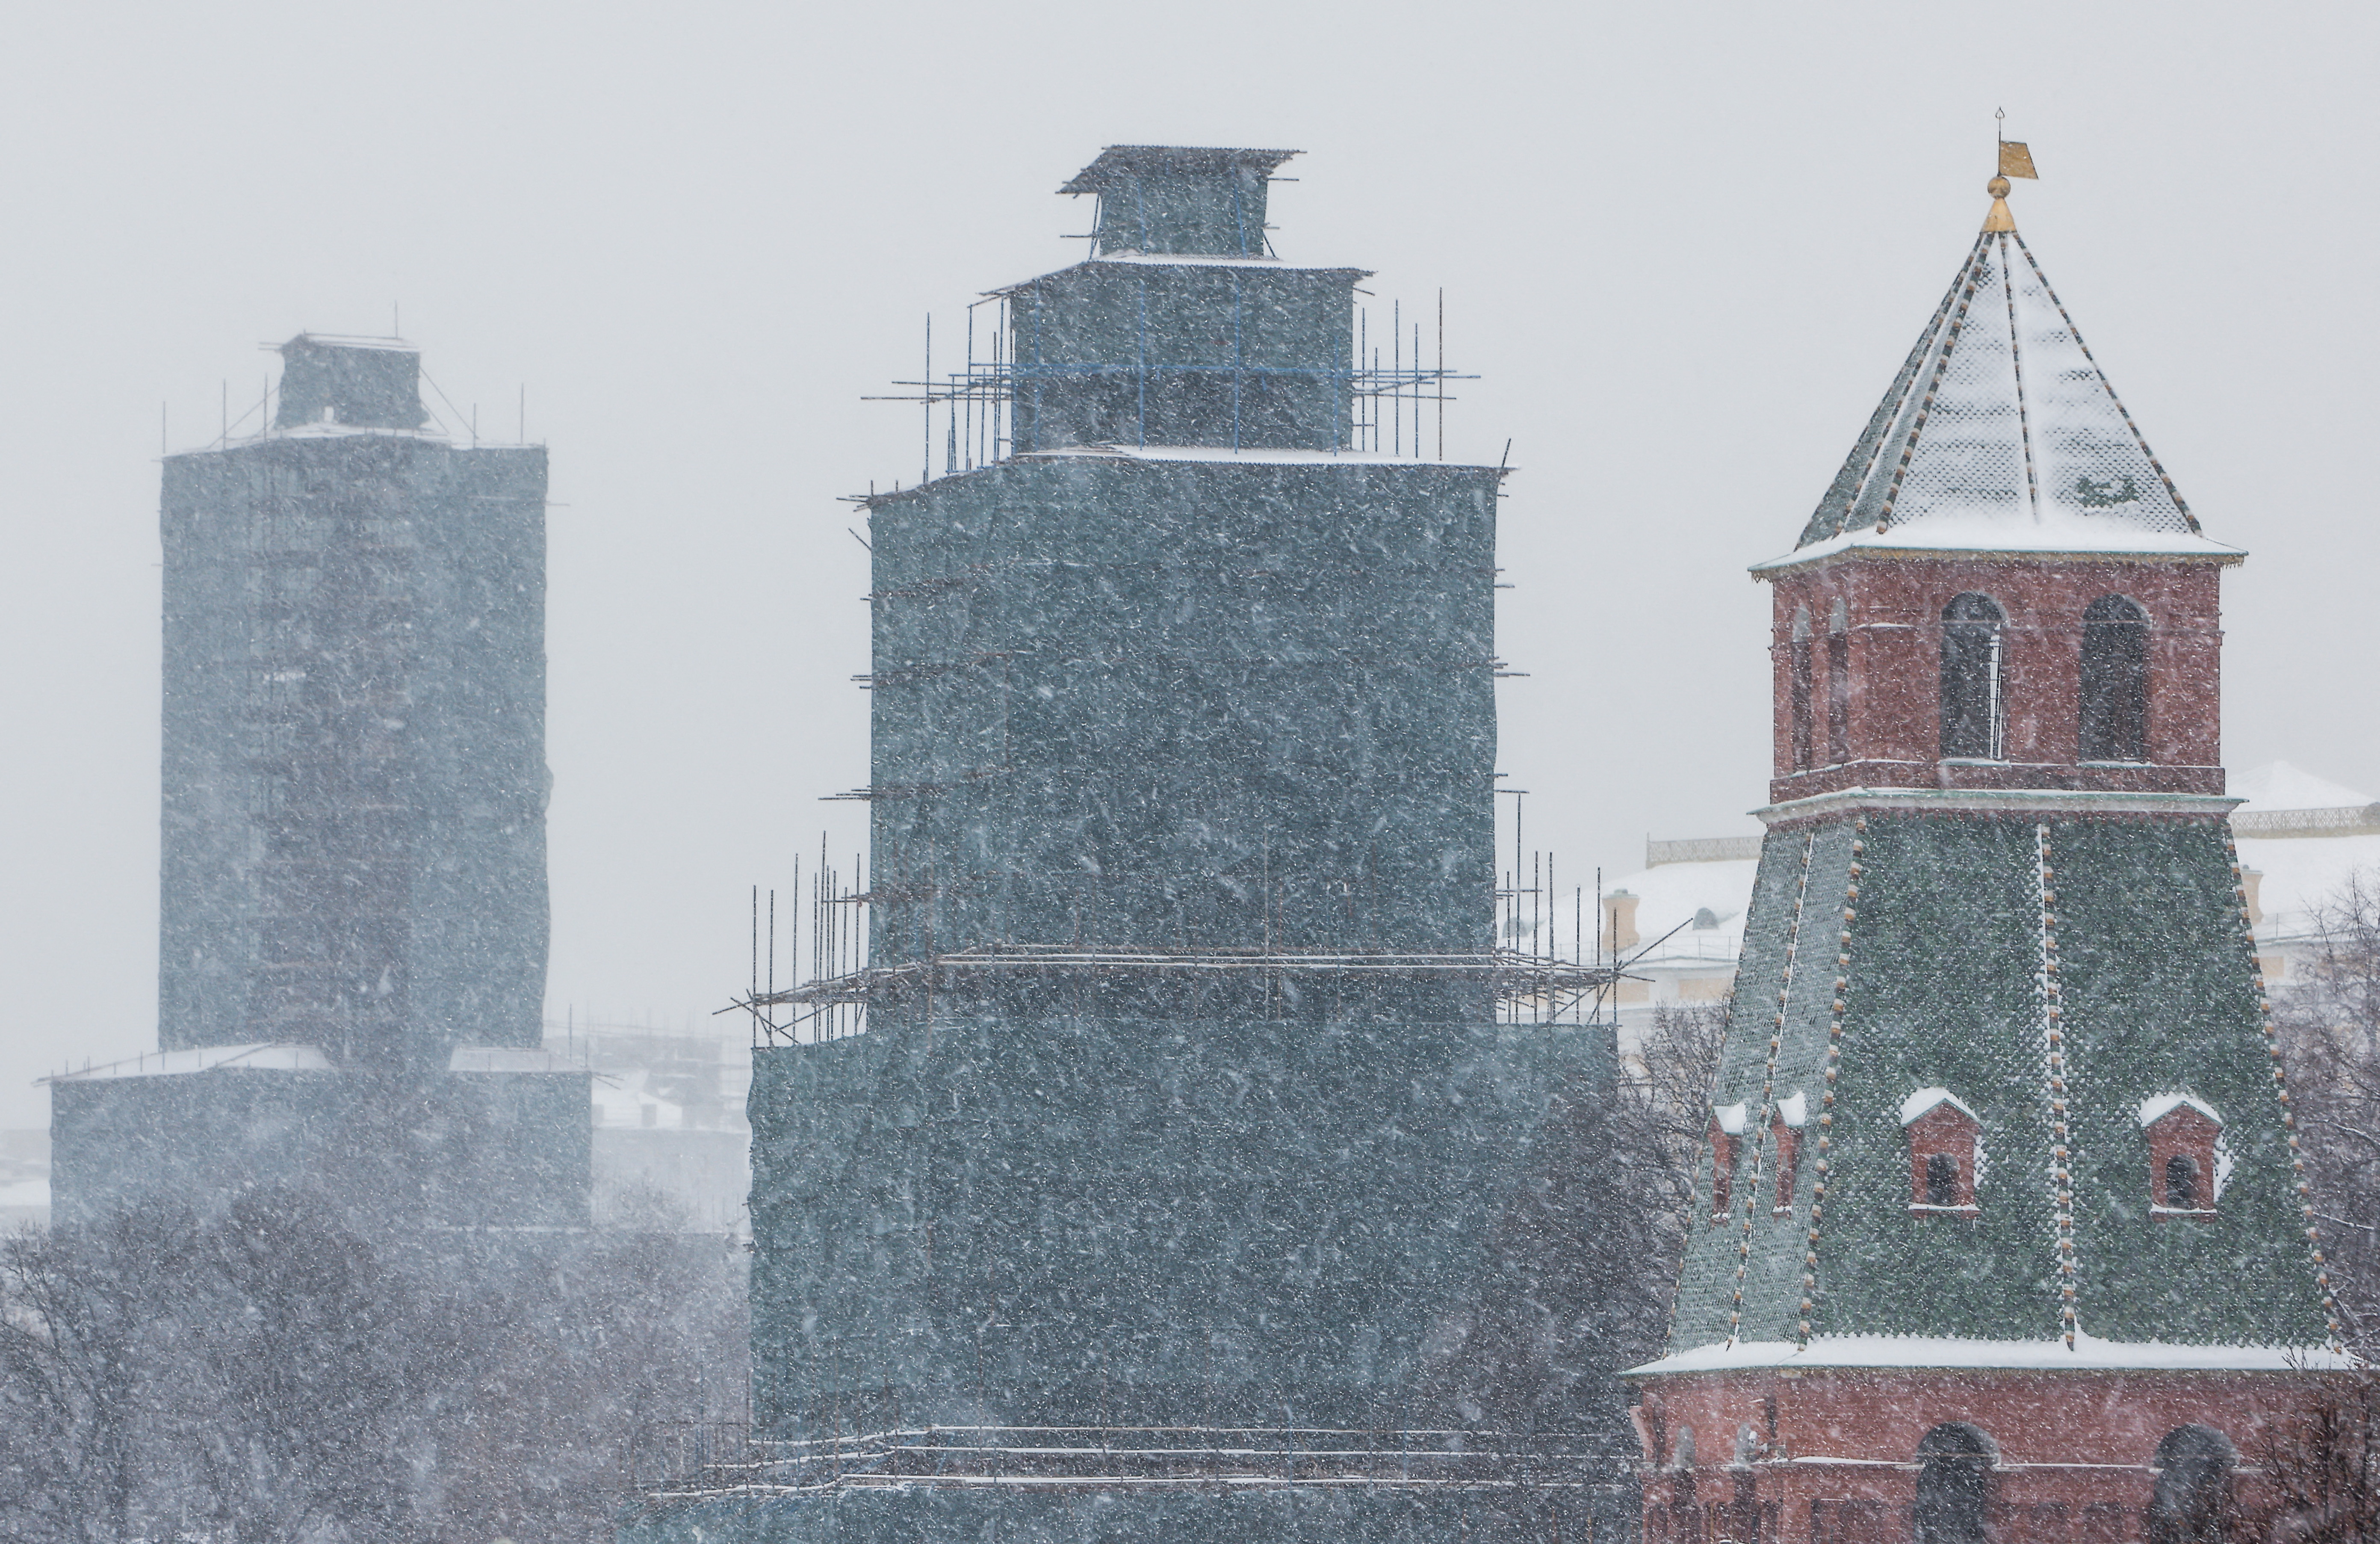 Towers of the Kremlin are pictured during heavy snowfall in Moscow